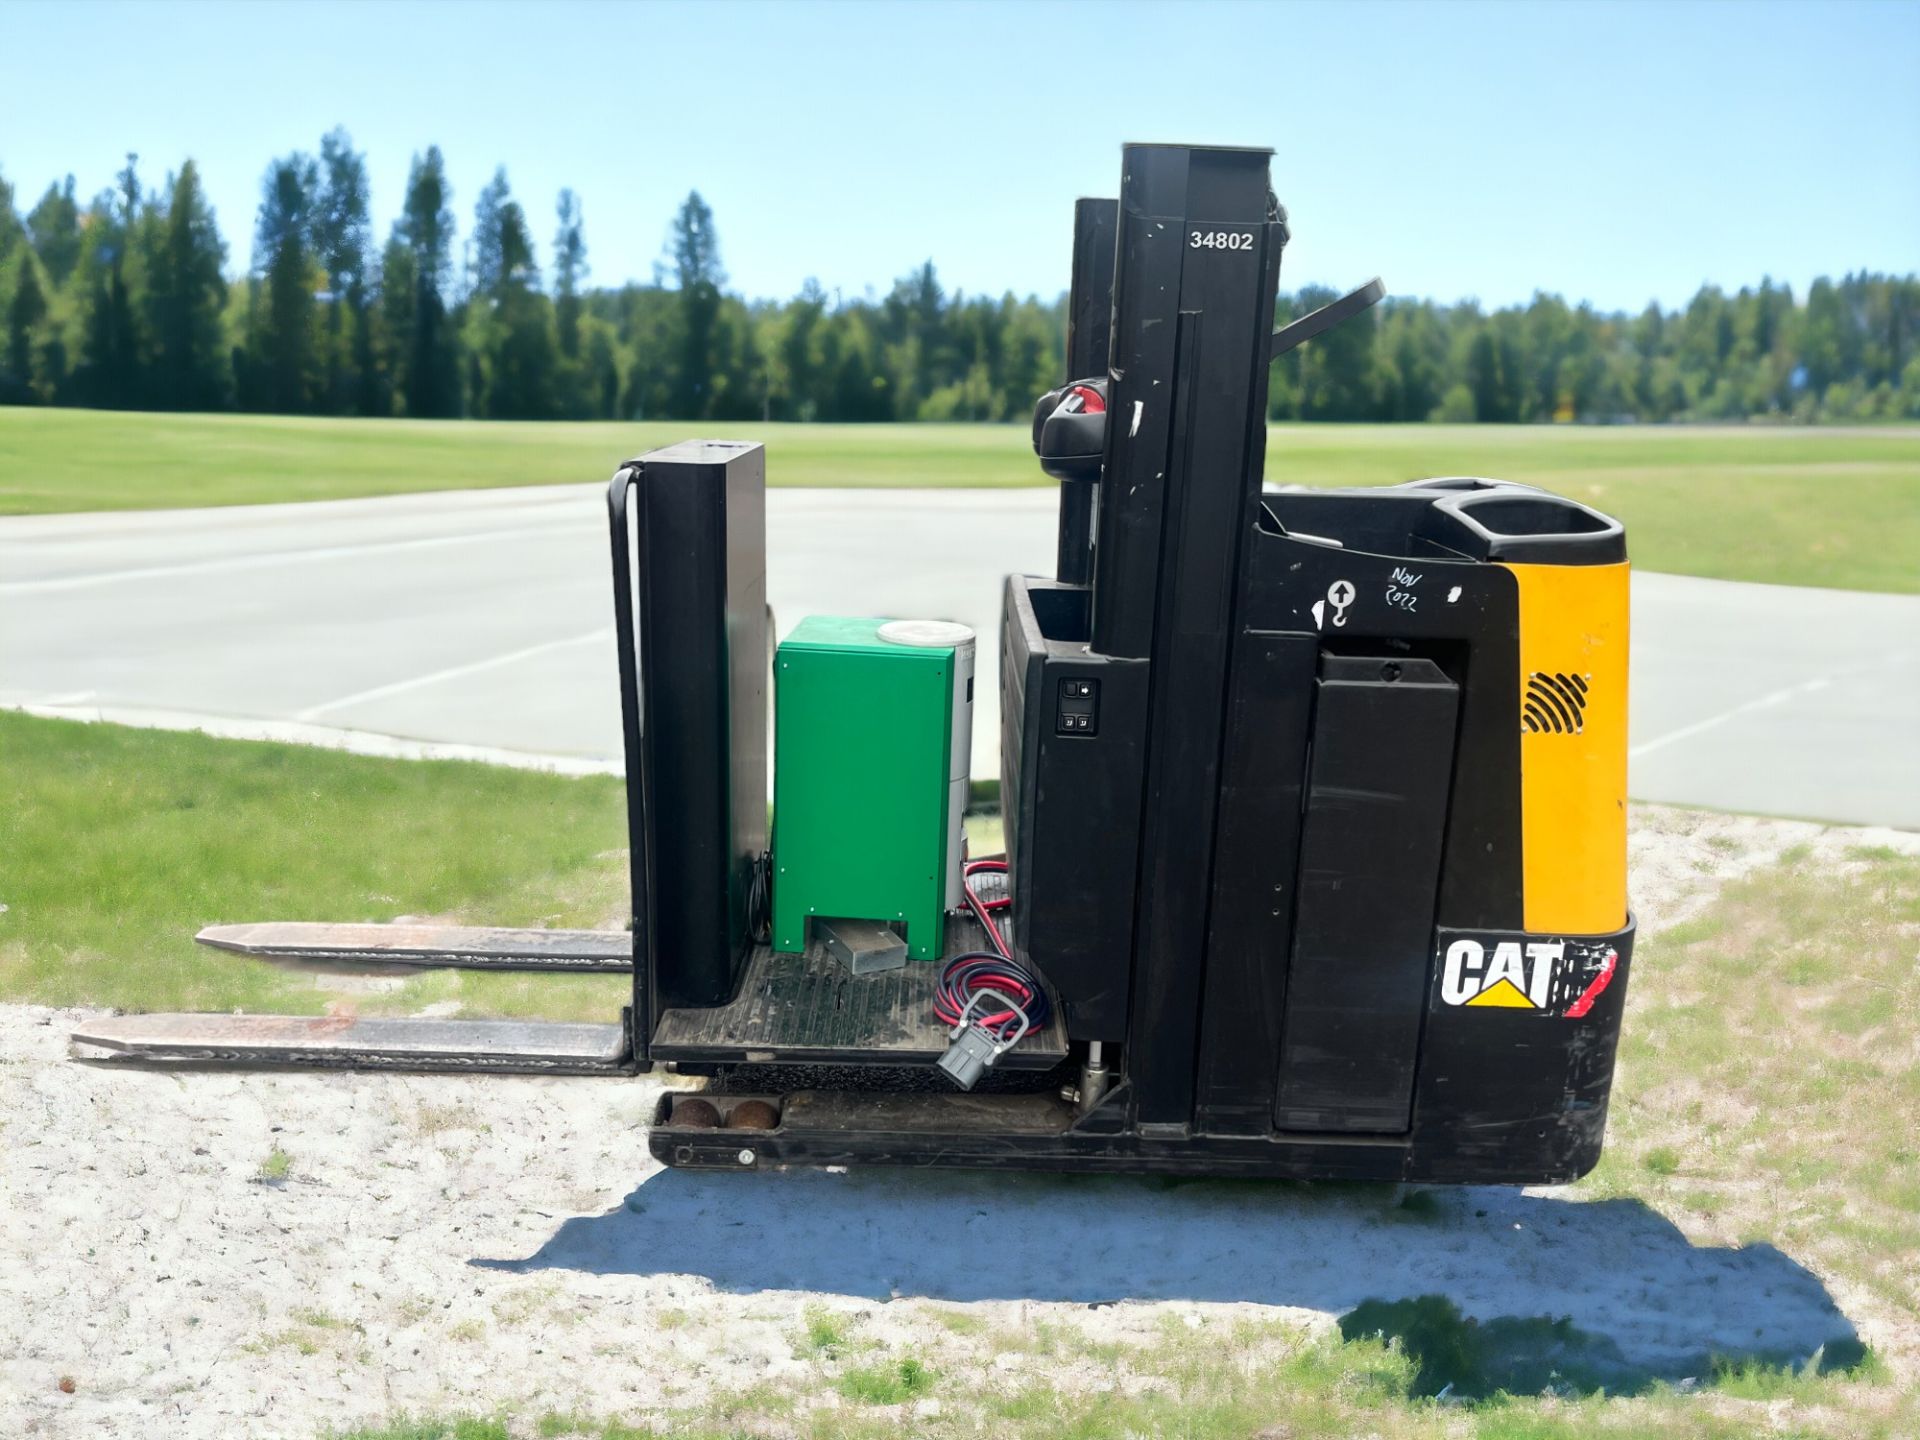 CAT LIFT TRUCKS ELECTRIC PALLET TRUCK - NOL10NF (2019) **(INCLUDES CHARGER)** - Image 3 of 4